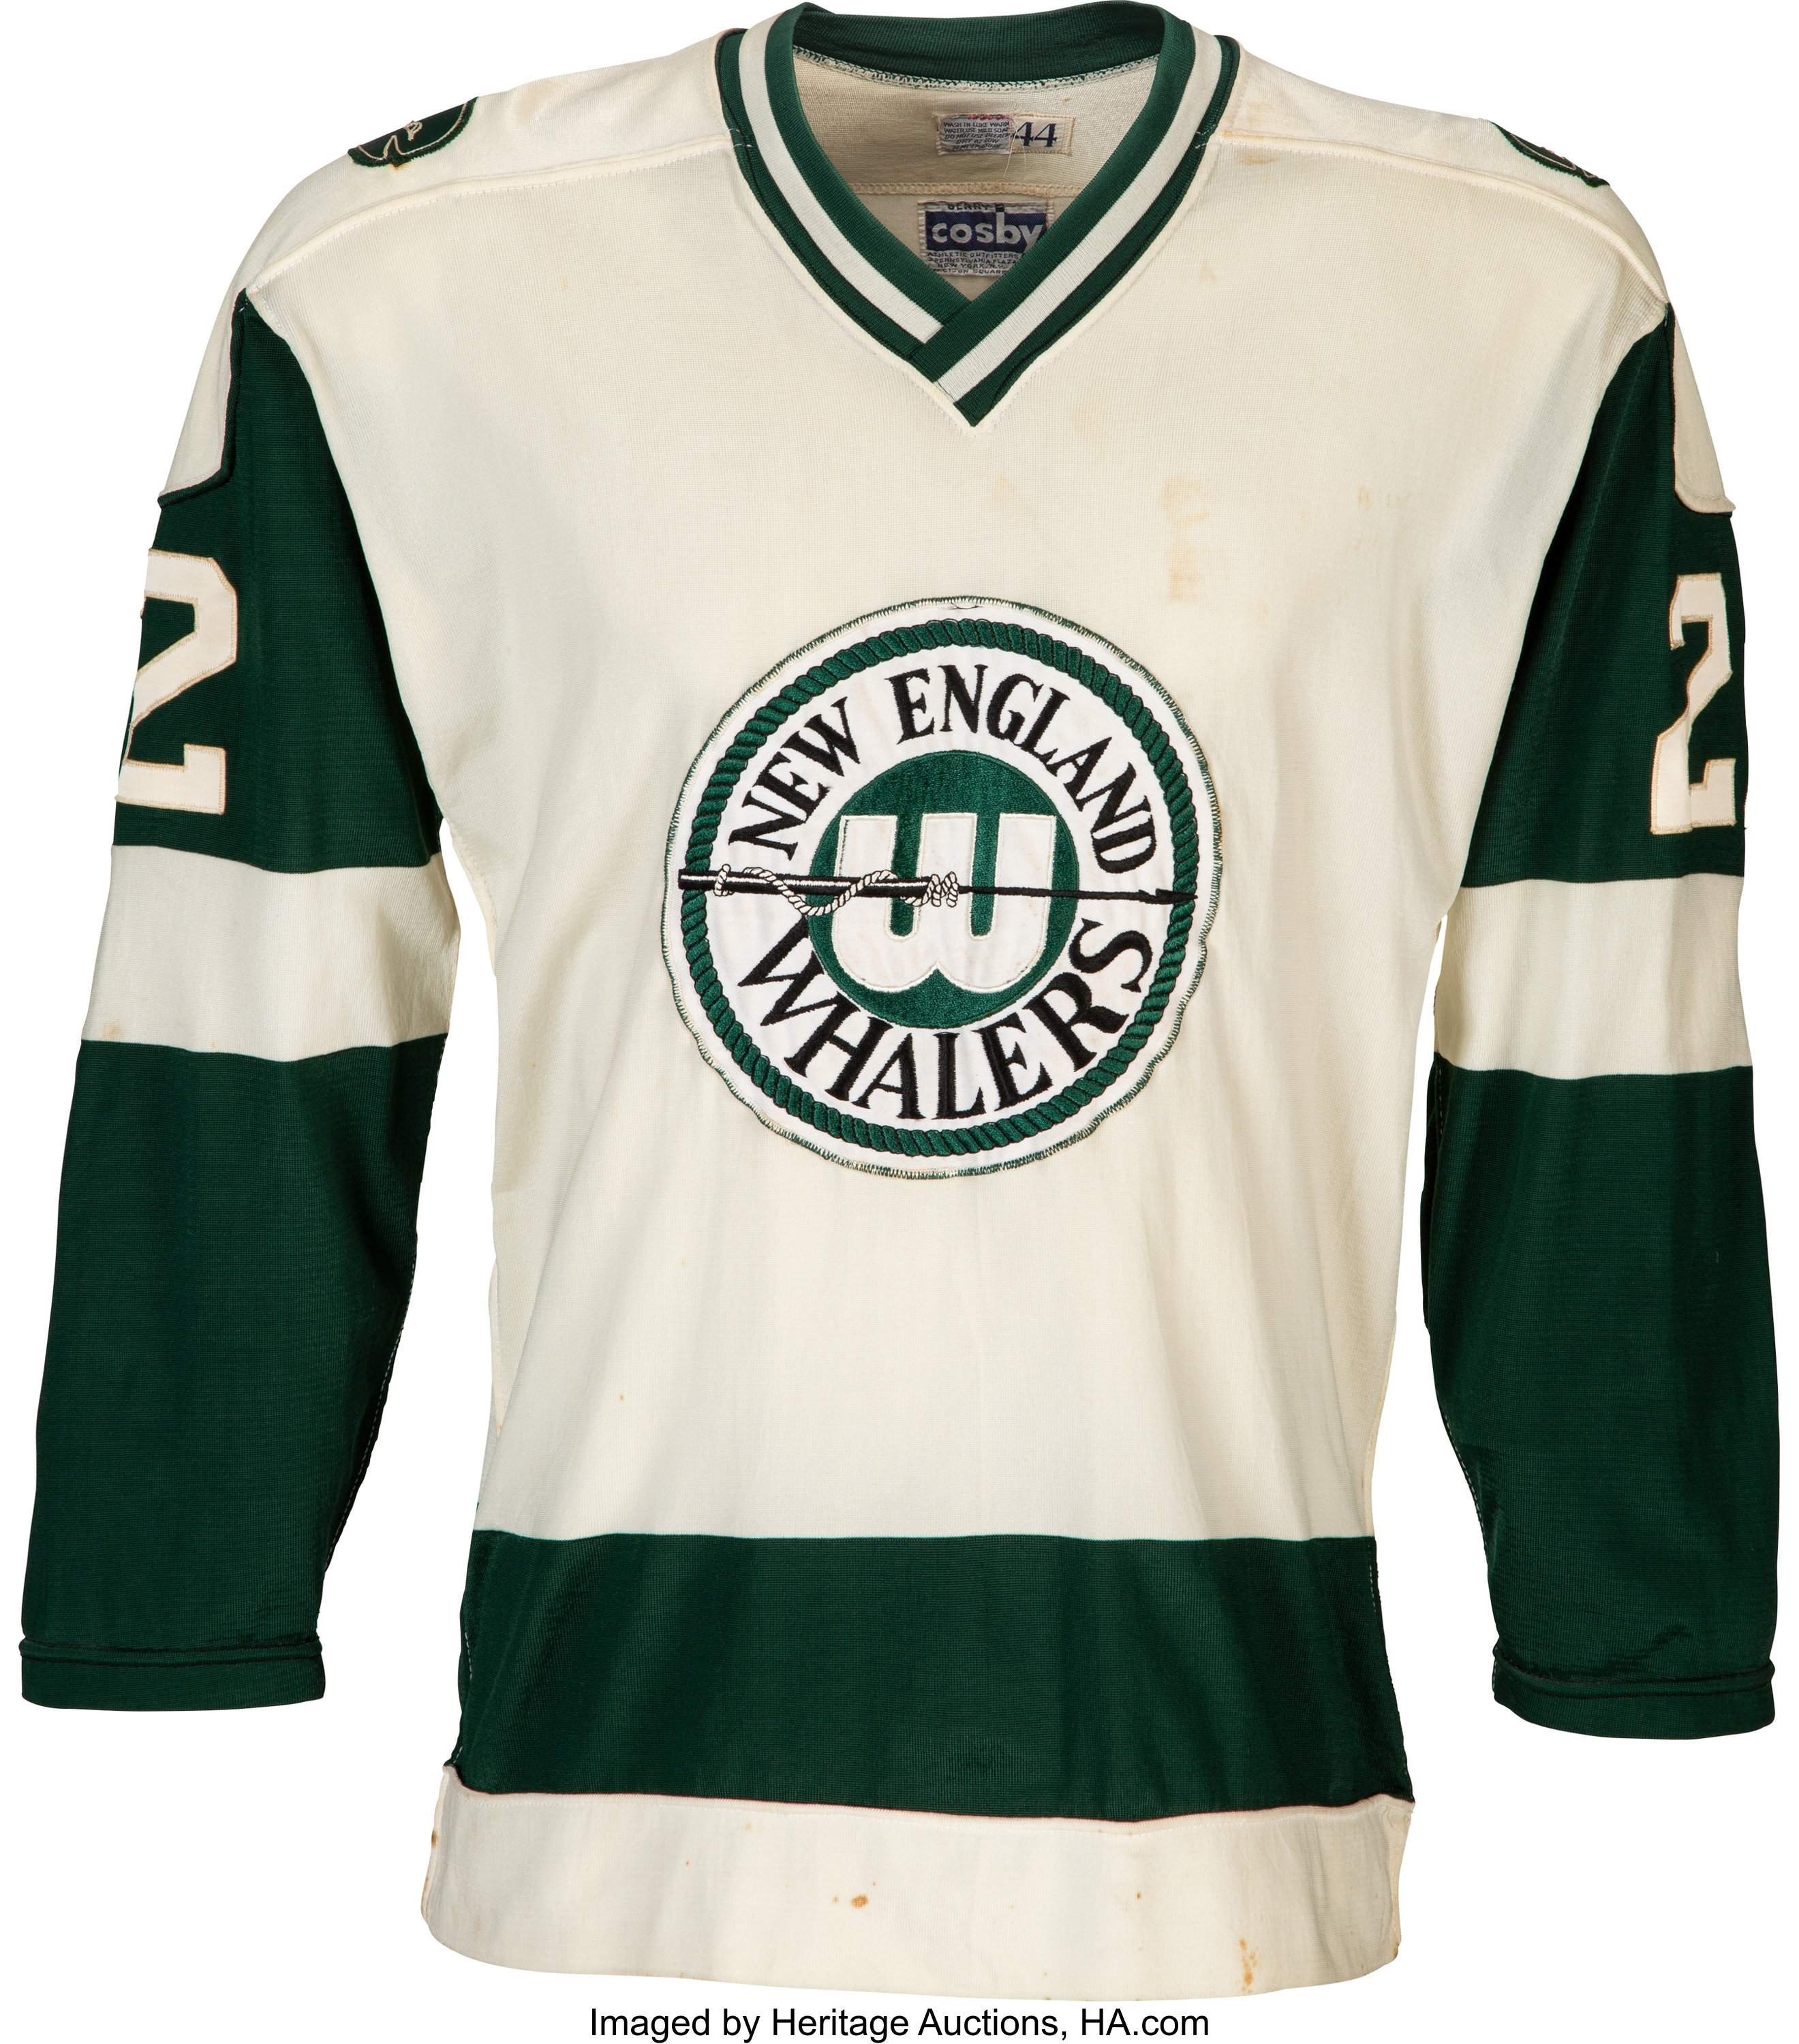  K-1 Sportswear New England Whalers Road Green Vintage WHA Hockey  Jersey (Small) : Sports & Outdoors